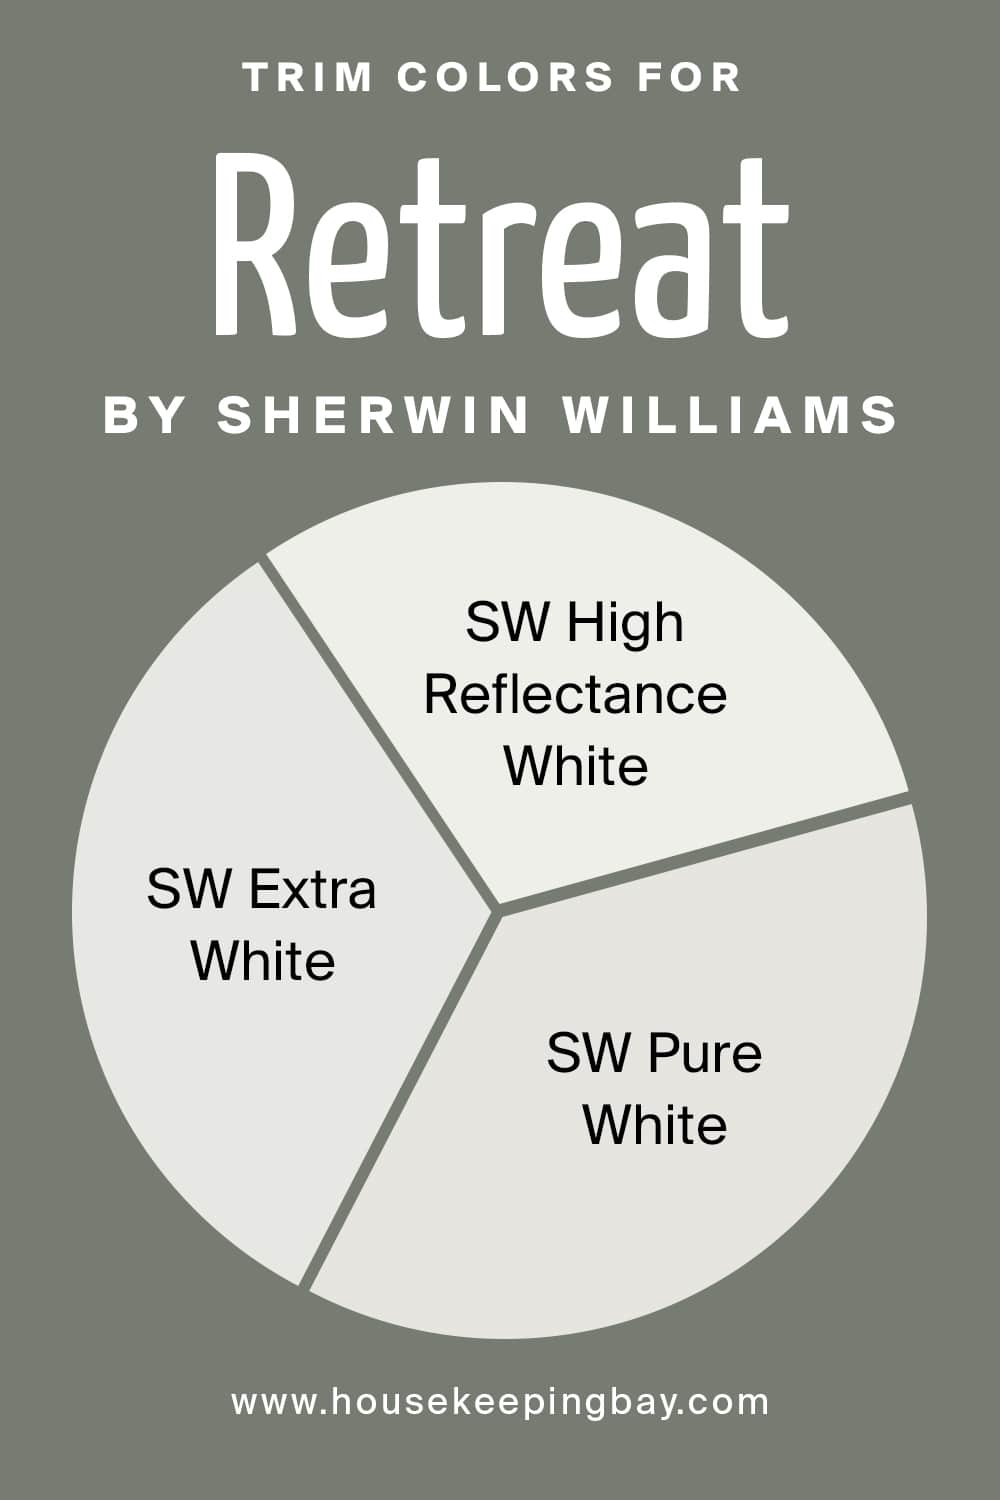 Trim Colors for Retreat by Sherwin Williams